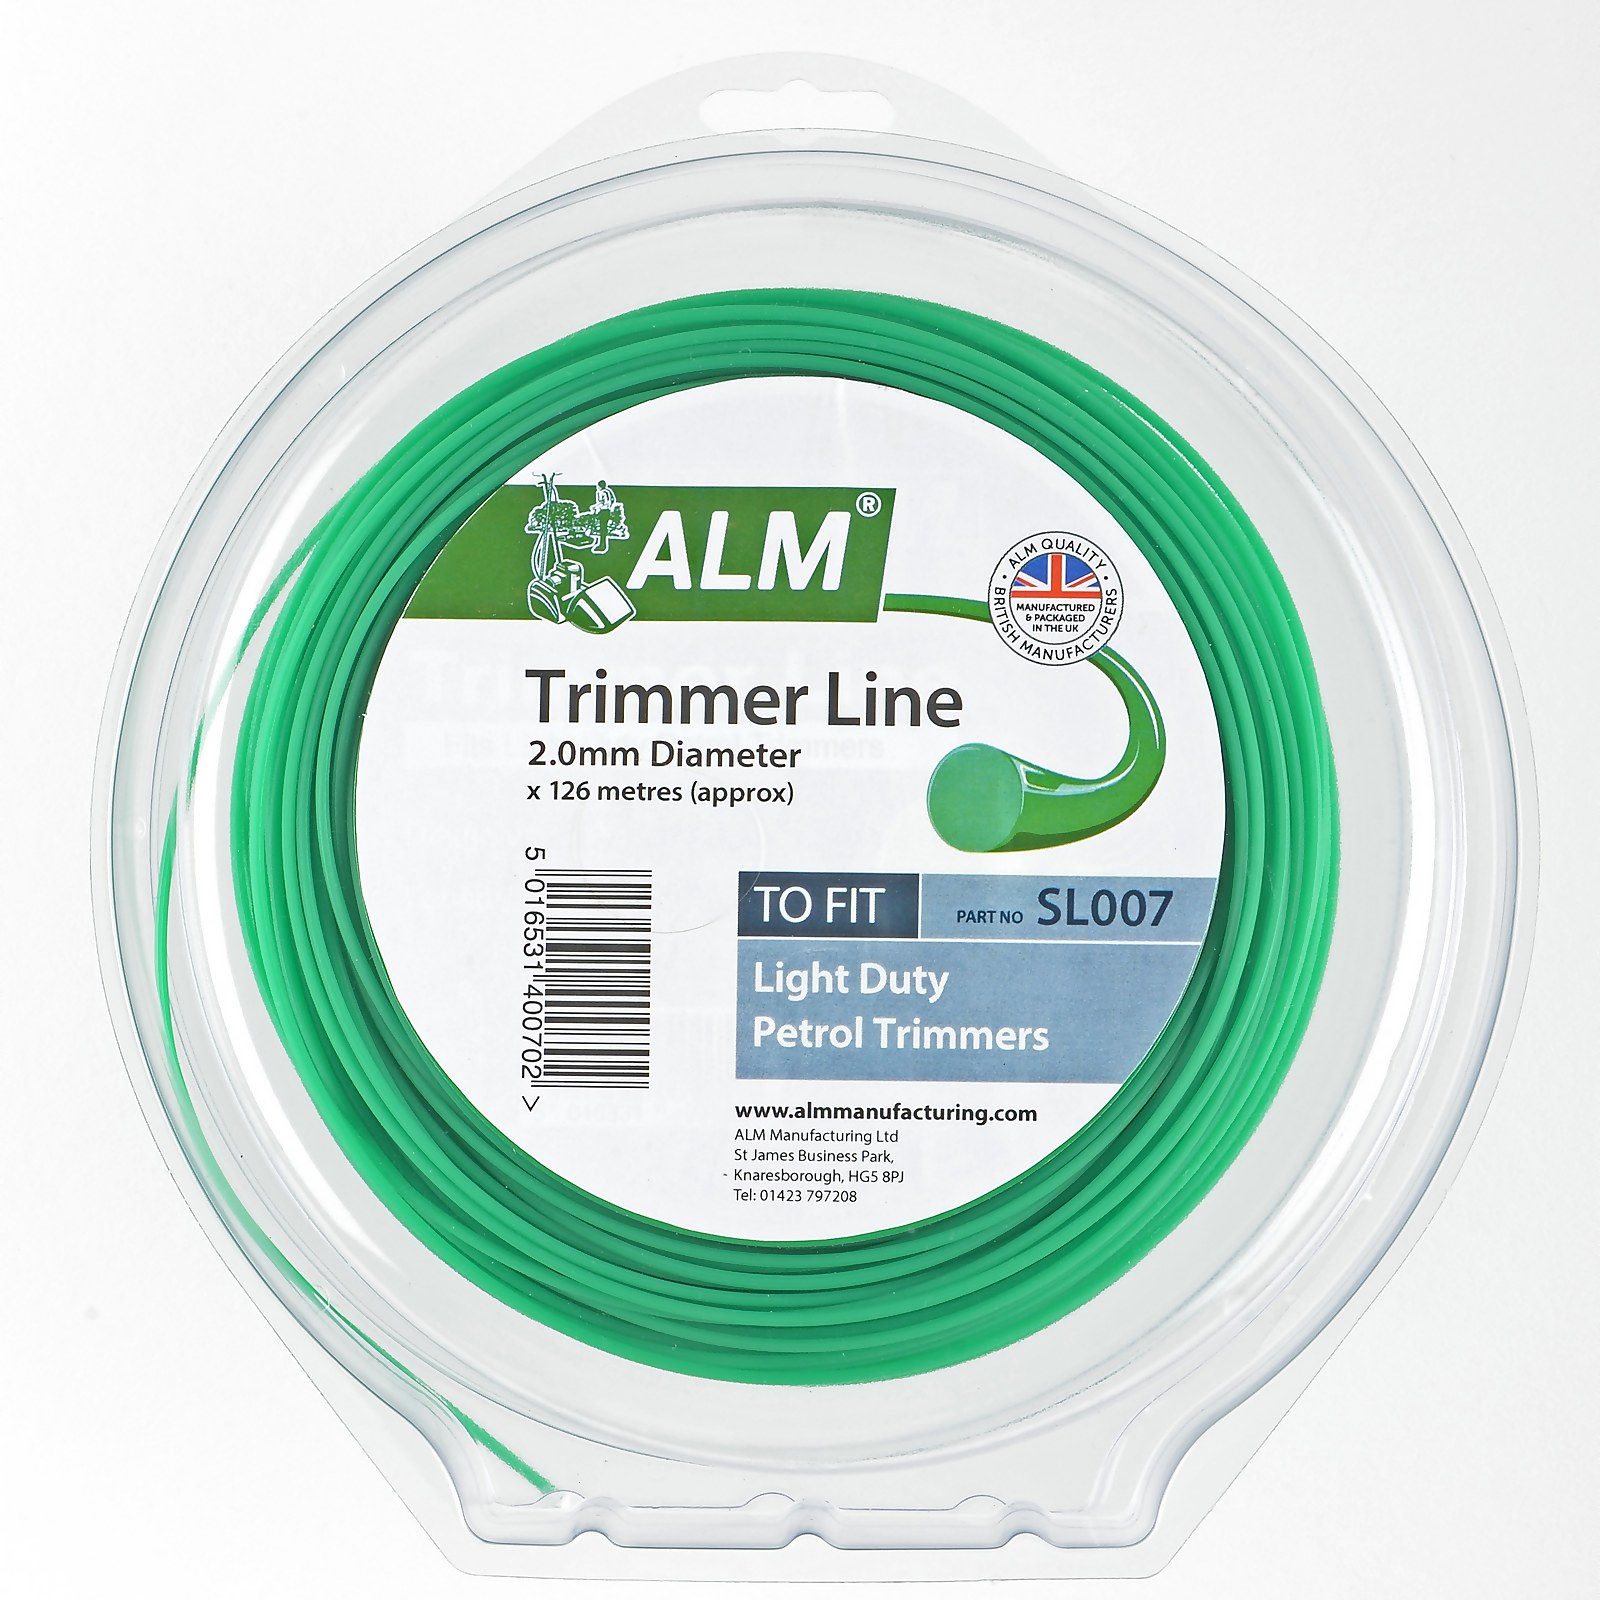 Photo of Alm Replacement Trimmer Line - 2.0mm X 126m